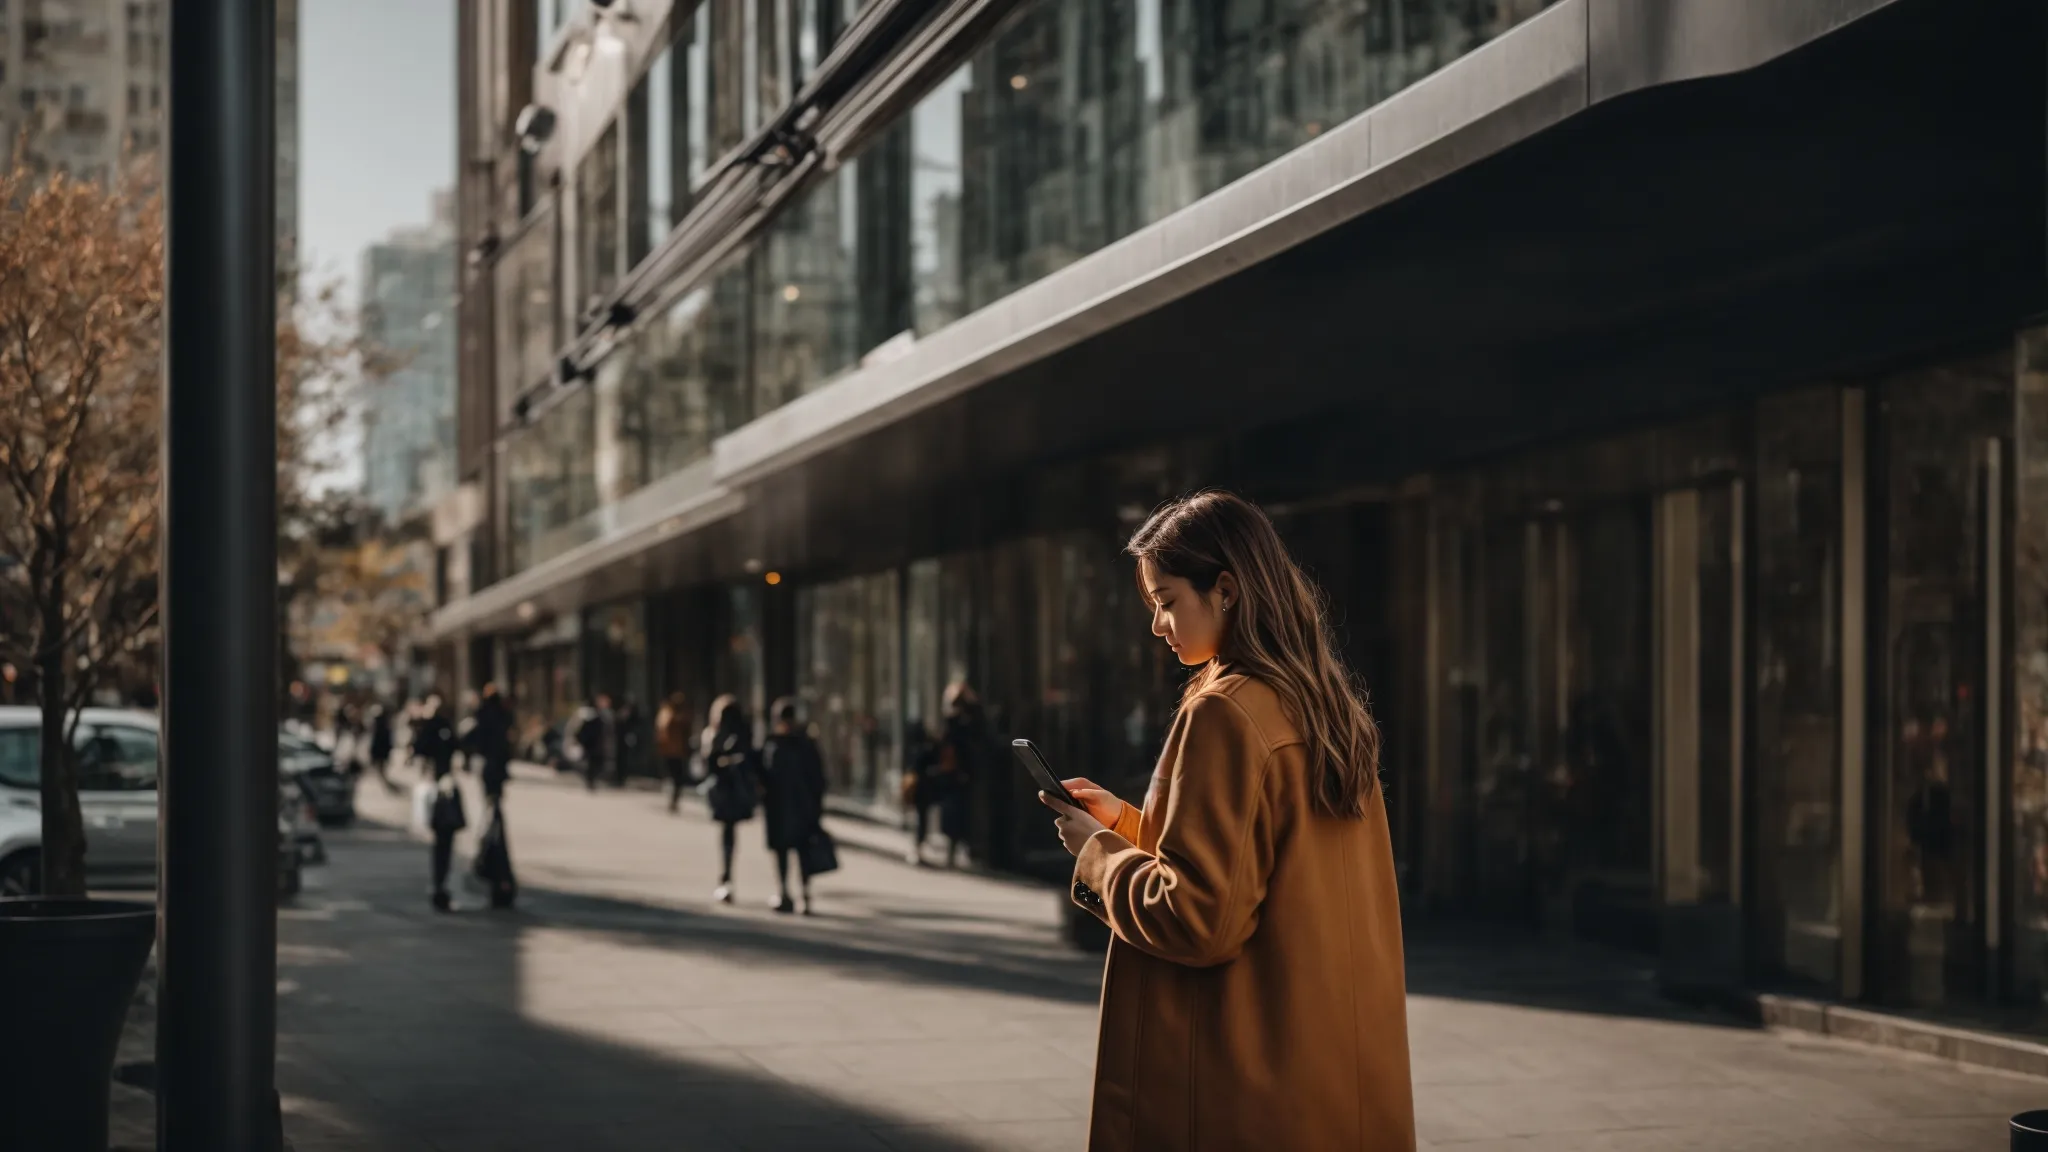 a person browsing on a smartphone while walking in the city captures the essence of mobile optimization enhancing user experiences.